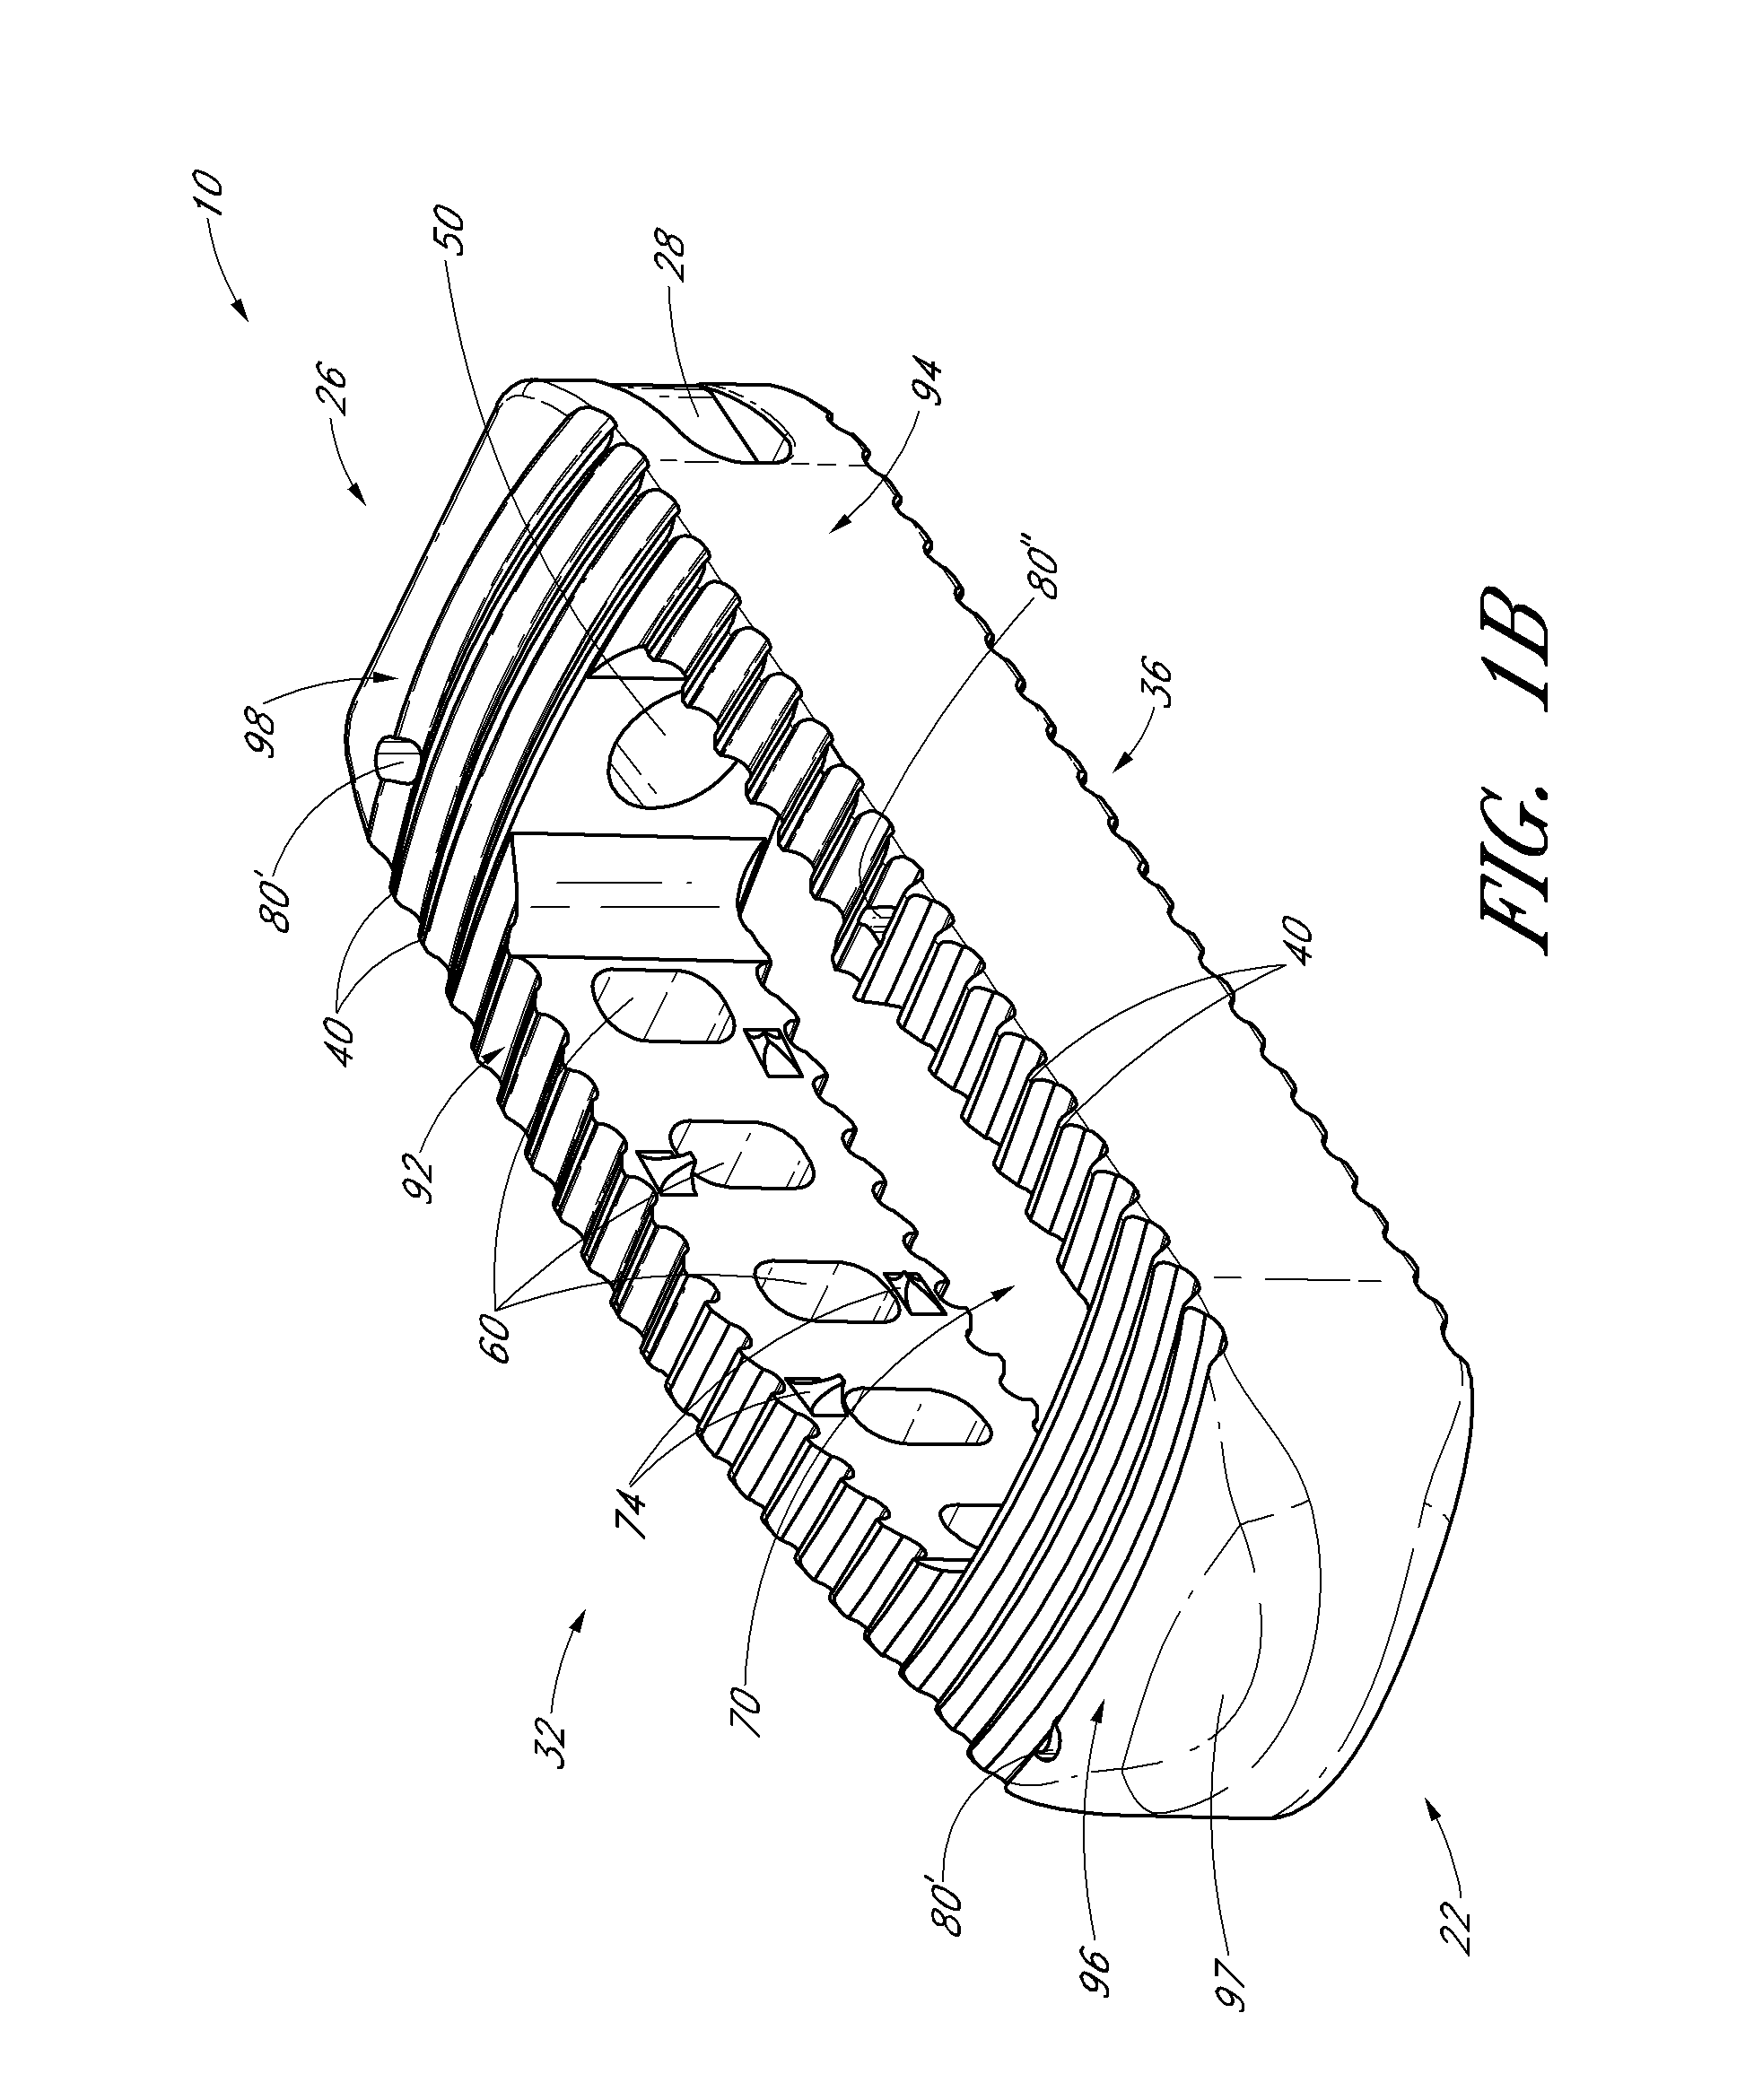 Methods of delivering an implant to an intervertebral space